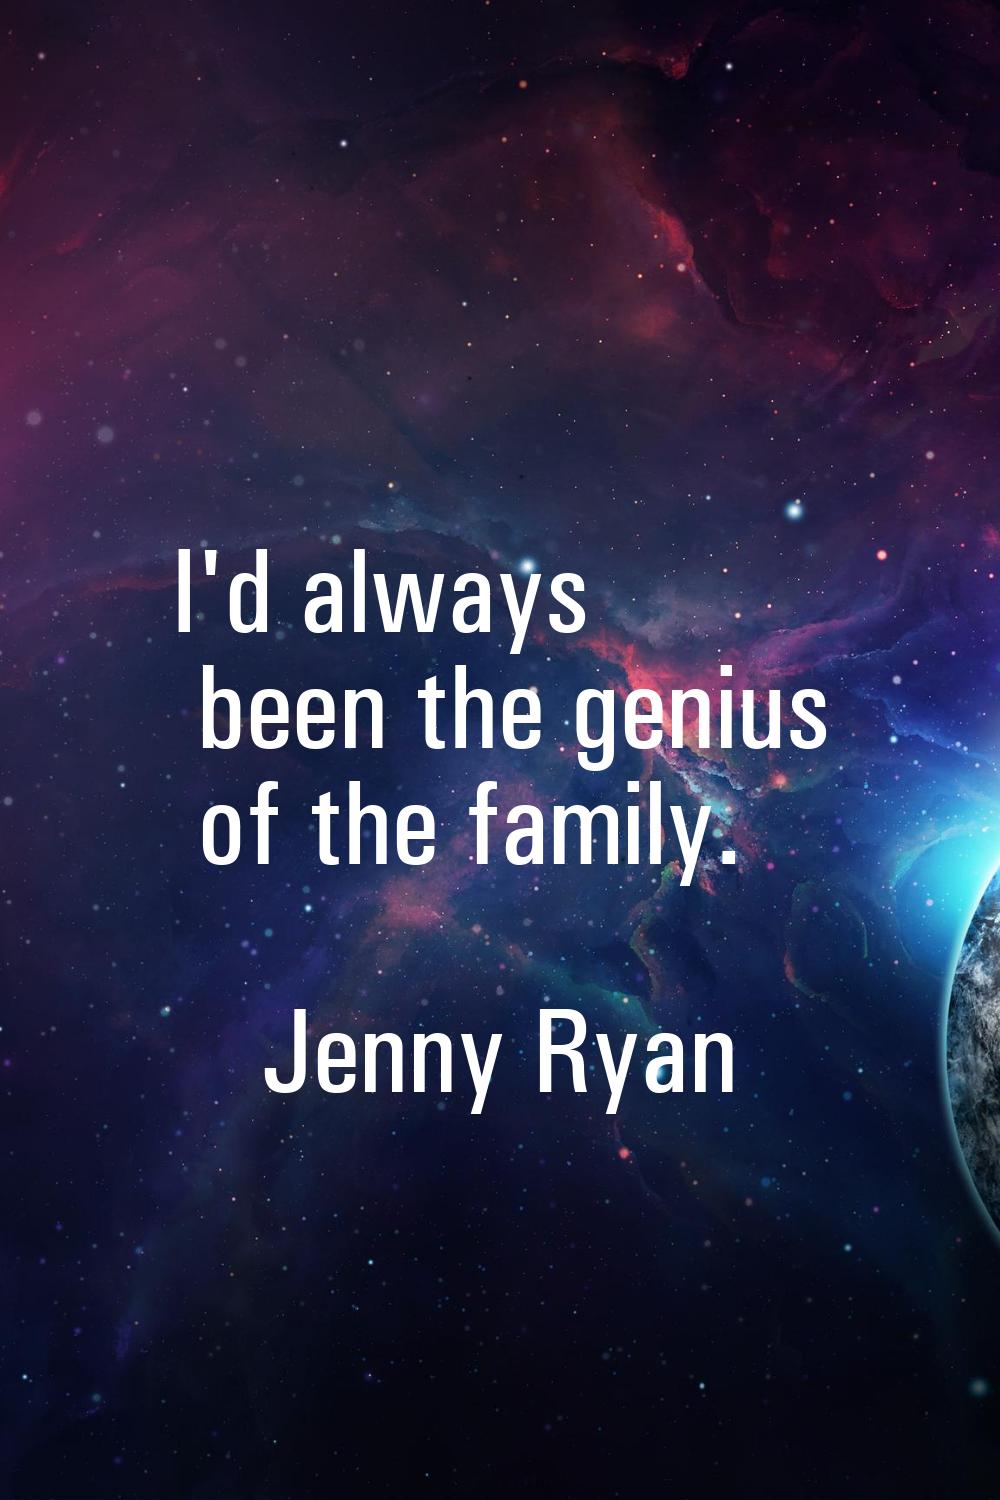 I'd always been the genius of the family.